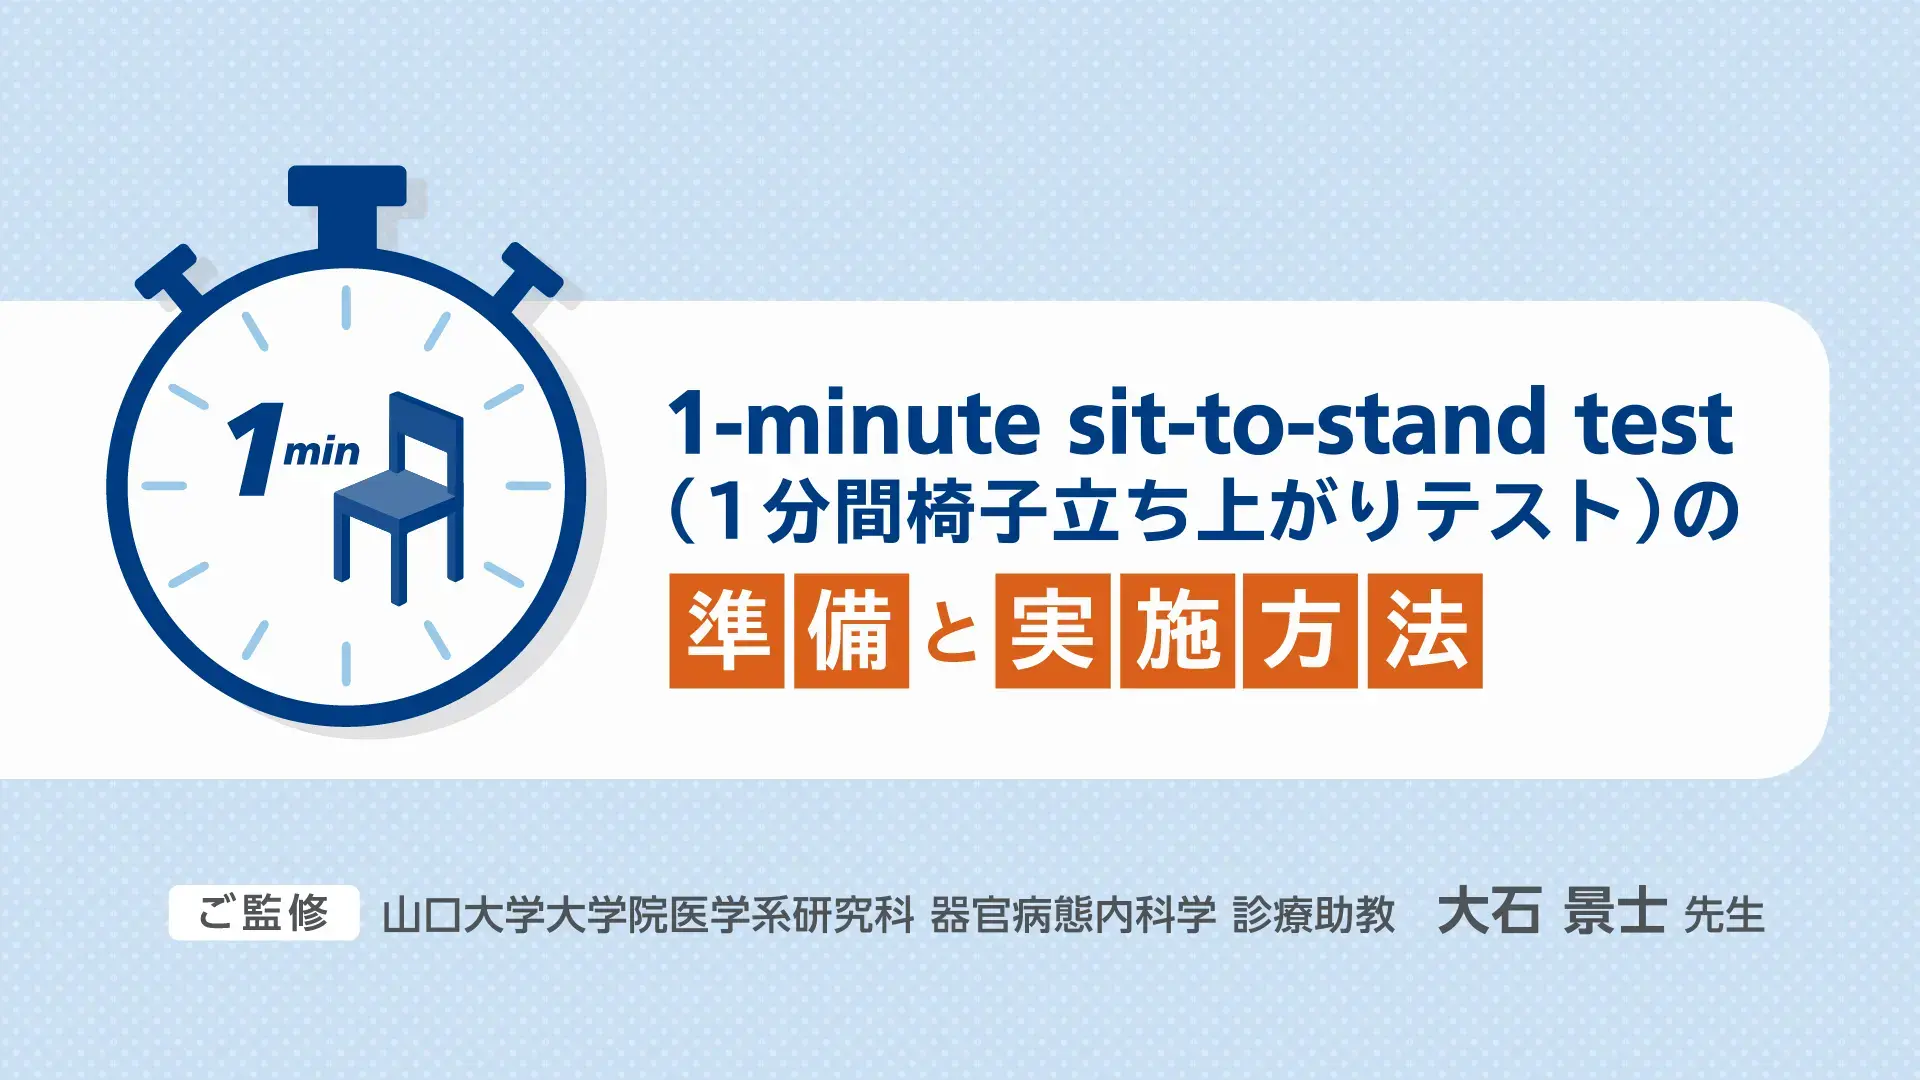 「1-minute sit-to-stand test（1分間椅子立ち上がりテスト）」の準備と実施方法動画（音声あり/4分31秒）